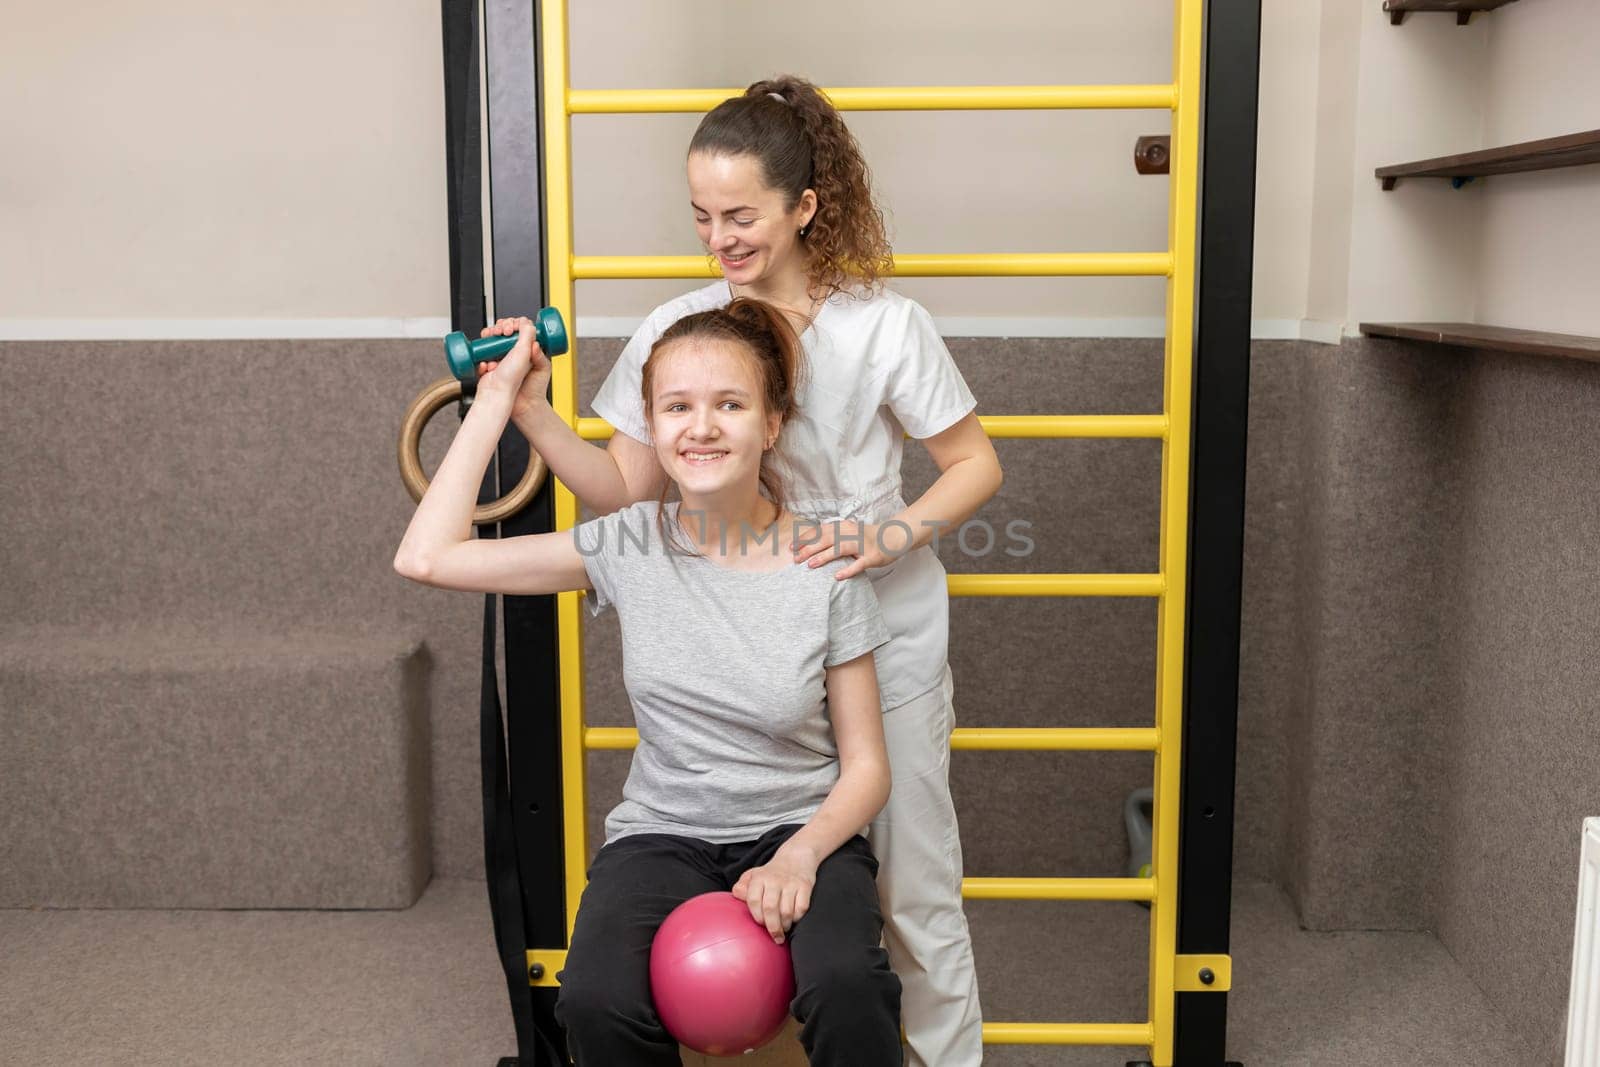 Physician Helps Happy Disabled Child Raise Dumbbell, Do Physical Exercises In Rehabilitation Room. Kid With Special Needs In Gym. Rehabilitation. Horizontal plane. by netatsi